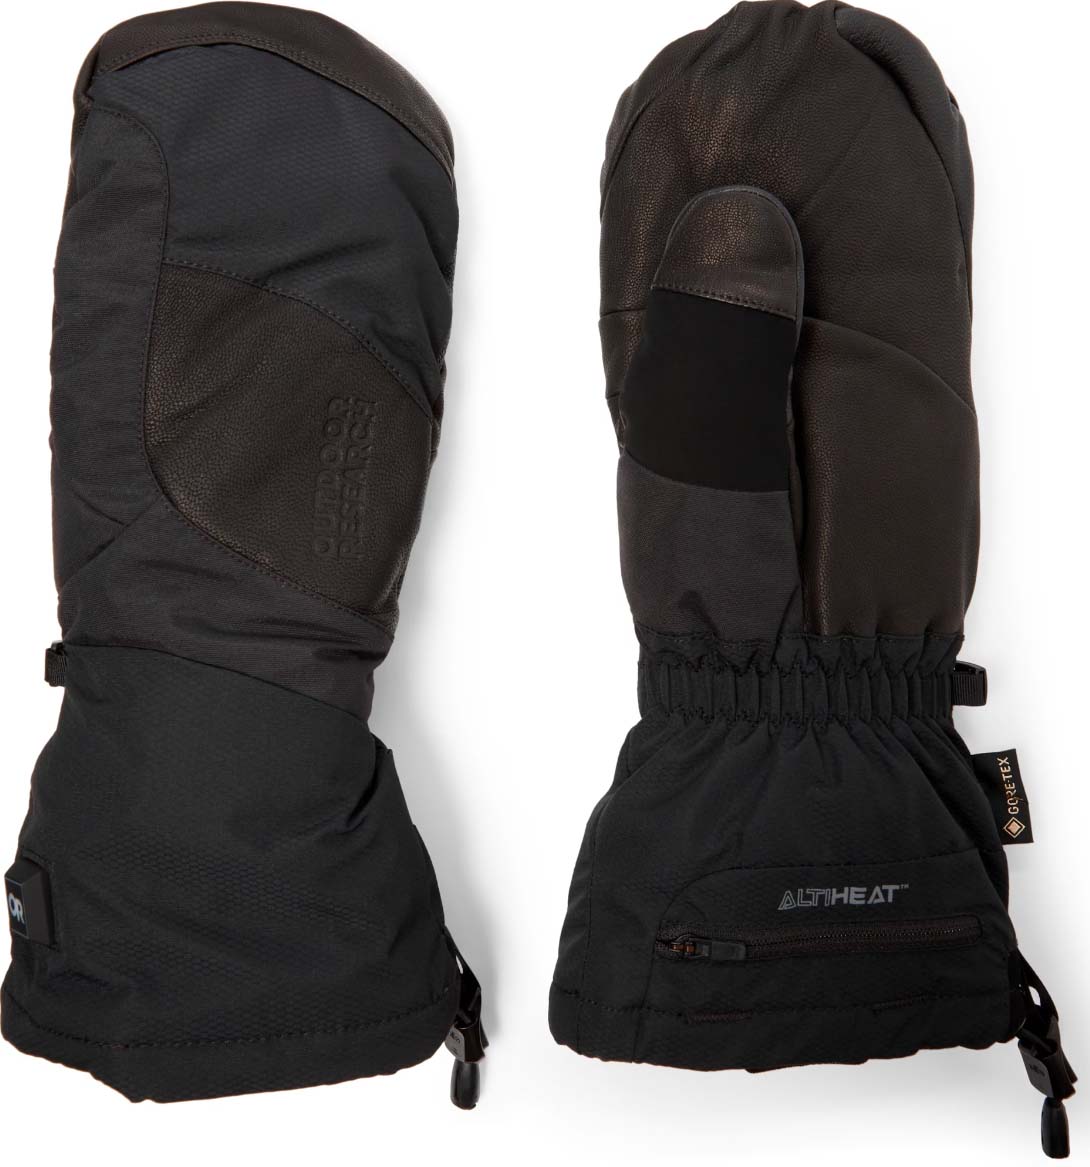 REI Gear Up Get Out Sale (Outdoor Research Prevail Heated Mitts)